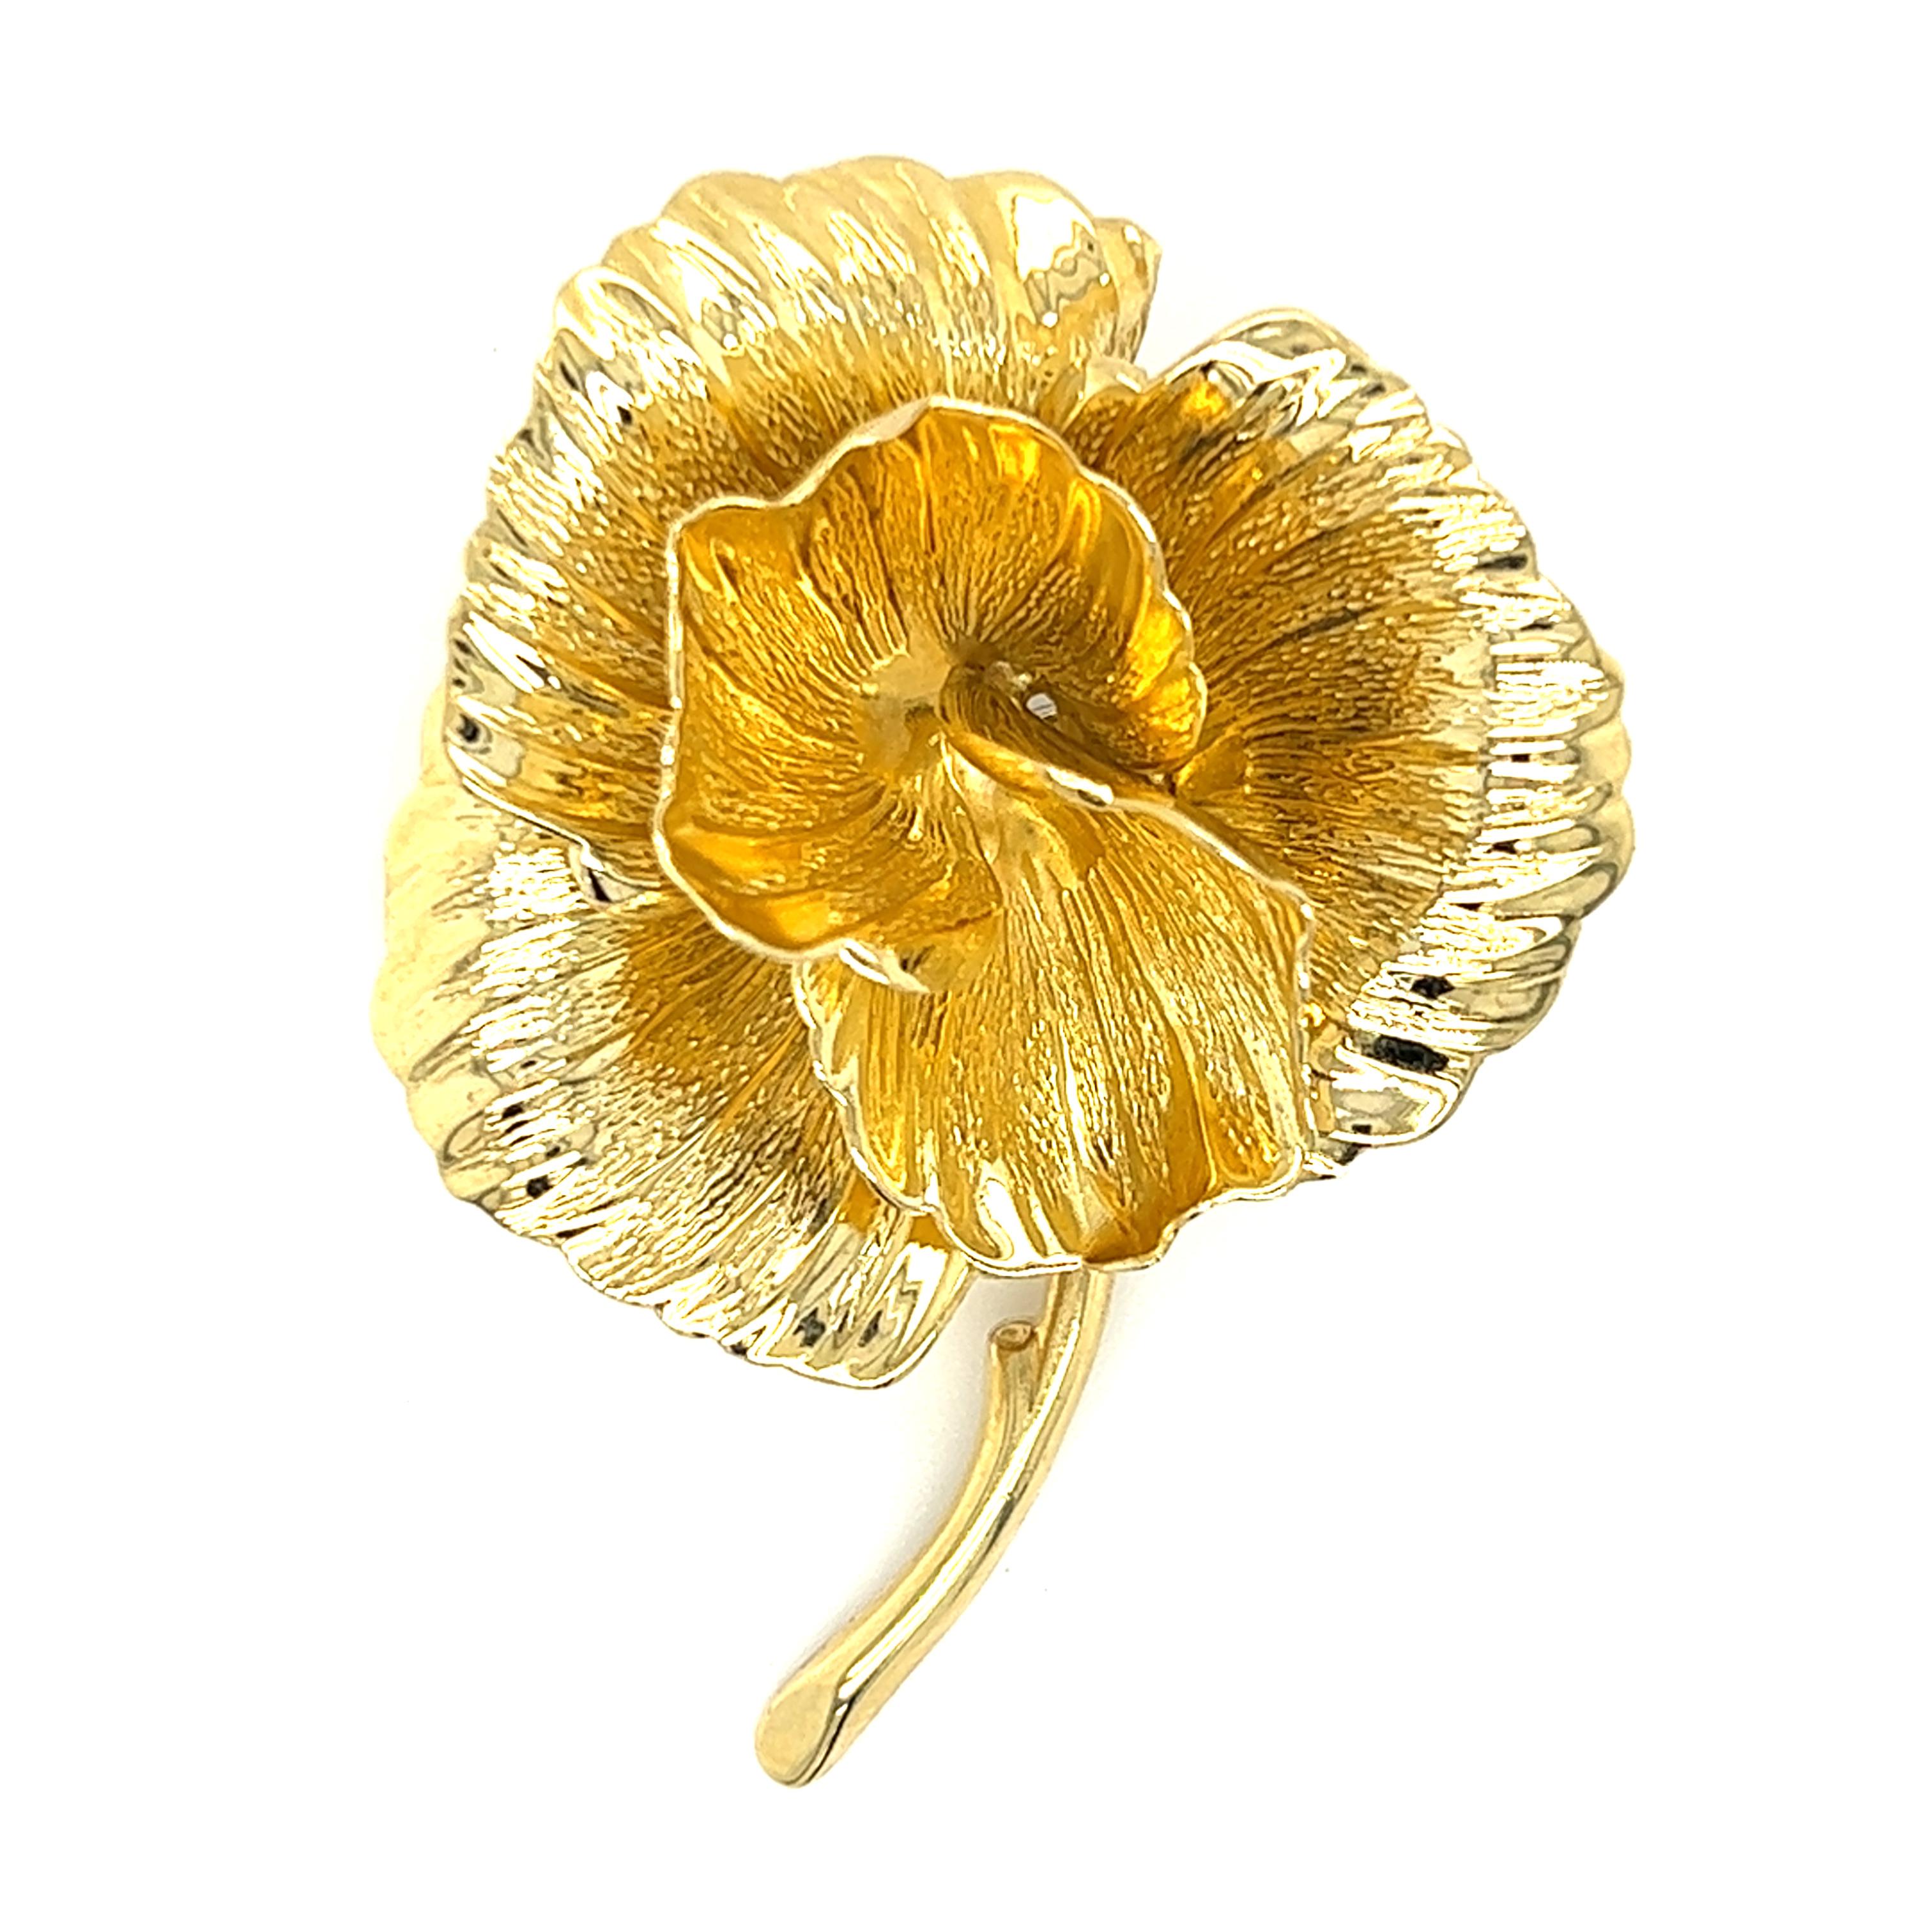  Created in 1965 by Henkel & Grosse Germany for Tiffany & Co., one 18K yellow gold modernist flower pin with bark and polished finish. The pin measures approximately two (2) inches long and 1.5 inches wide, complete with a traditional pin closure.